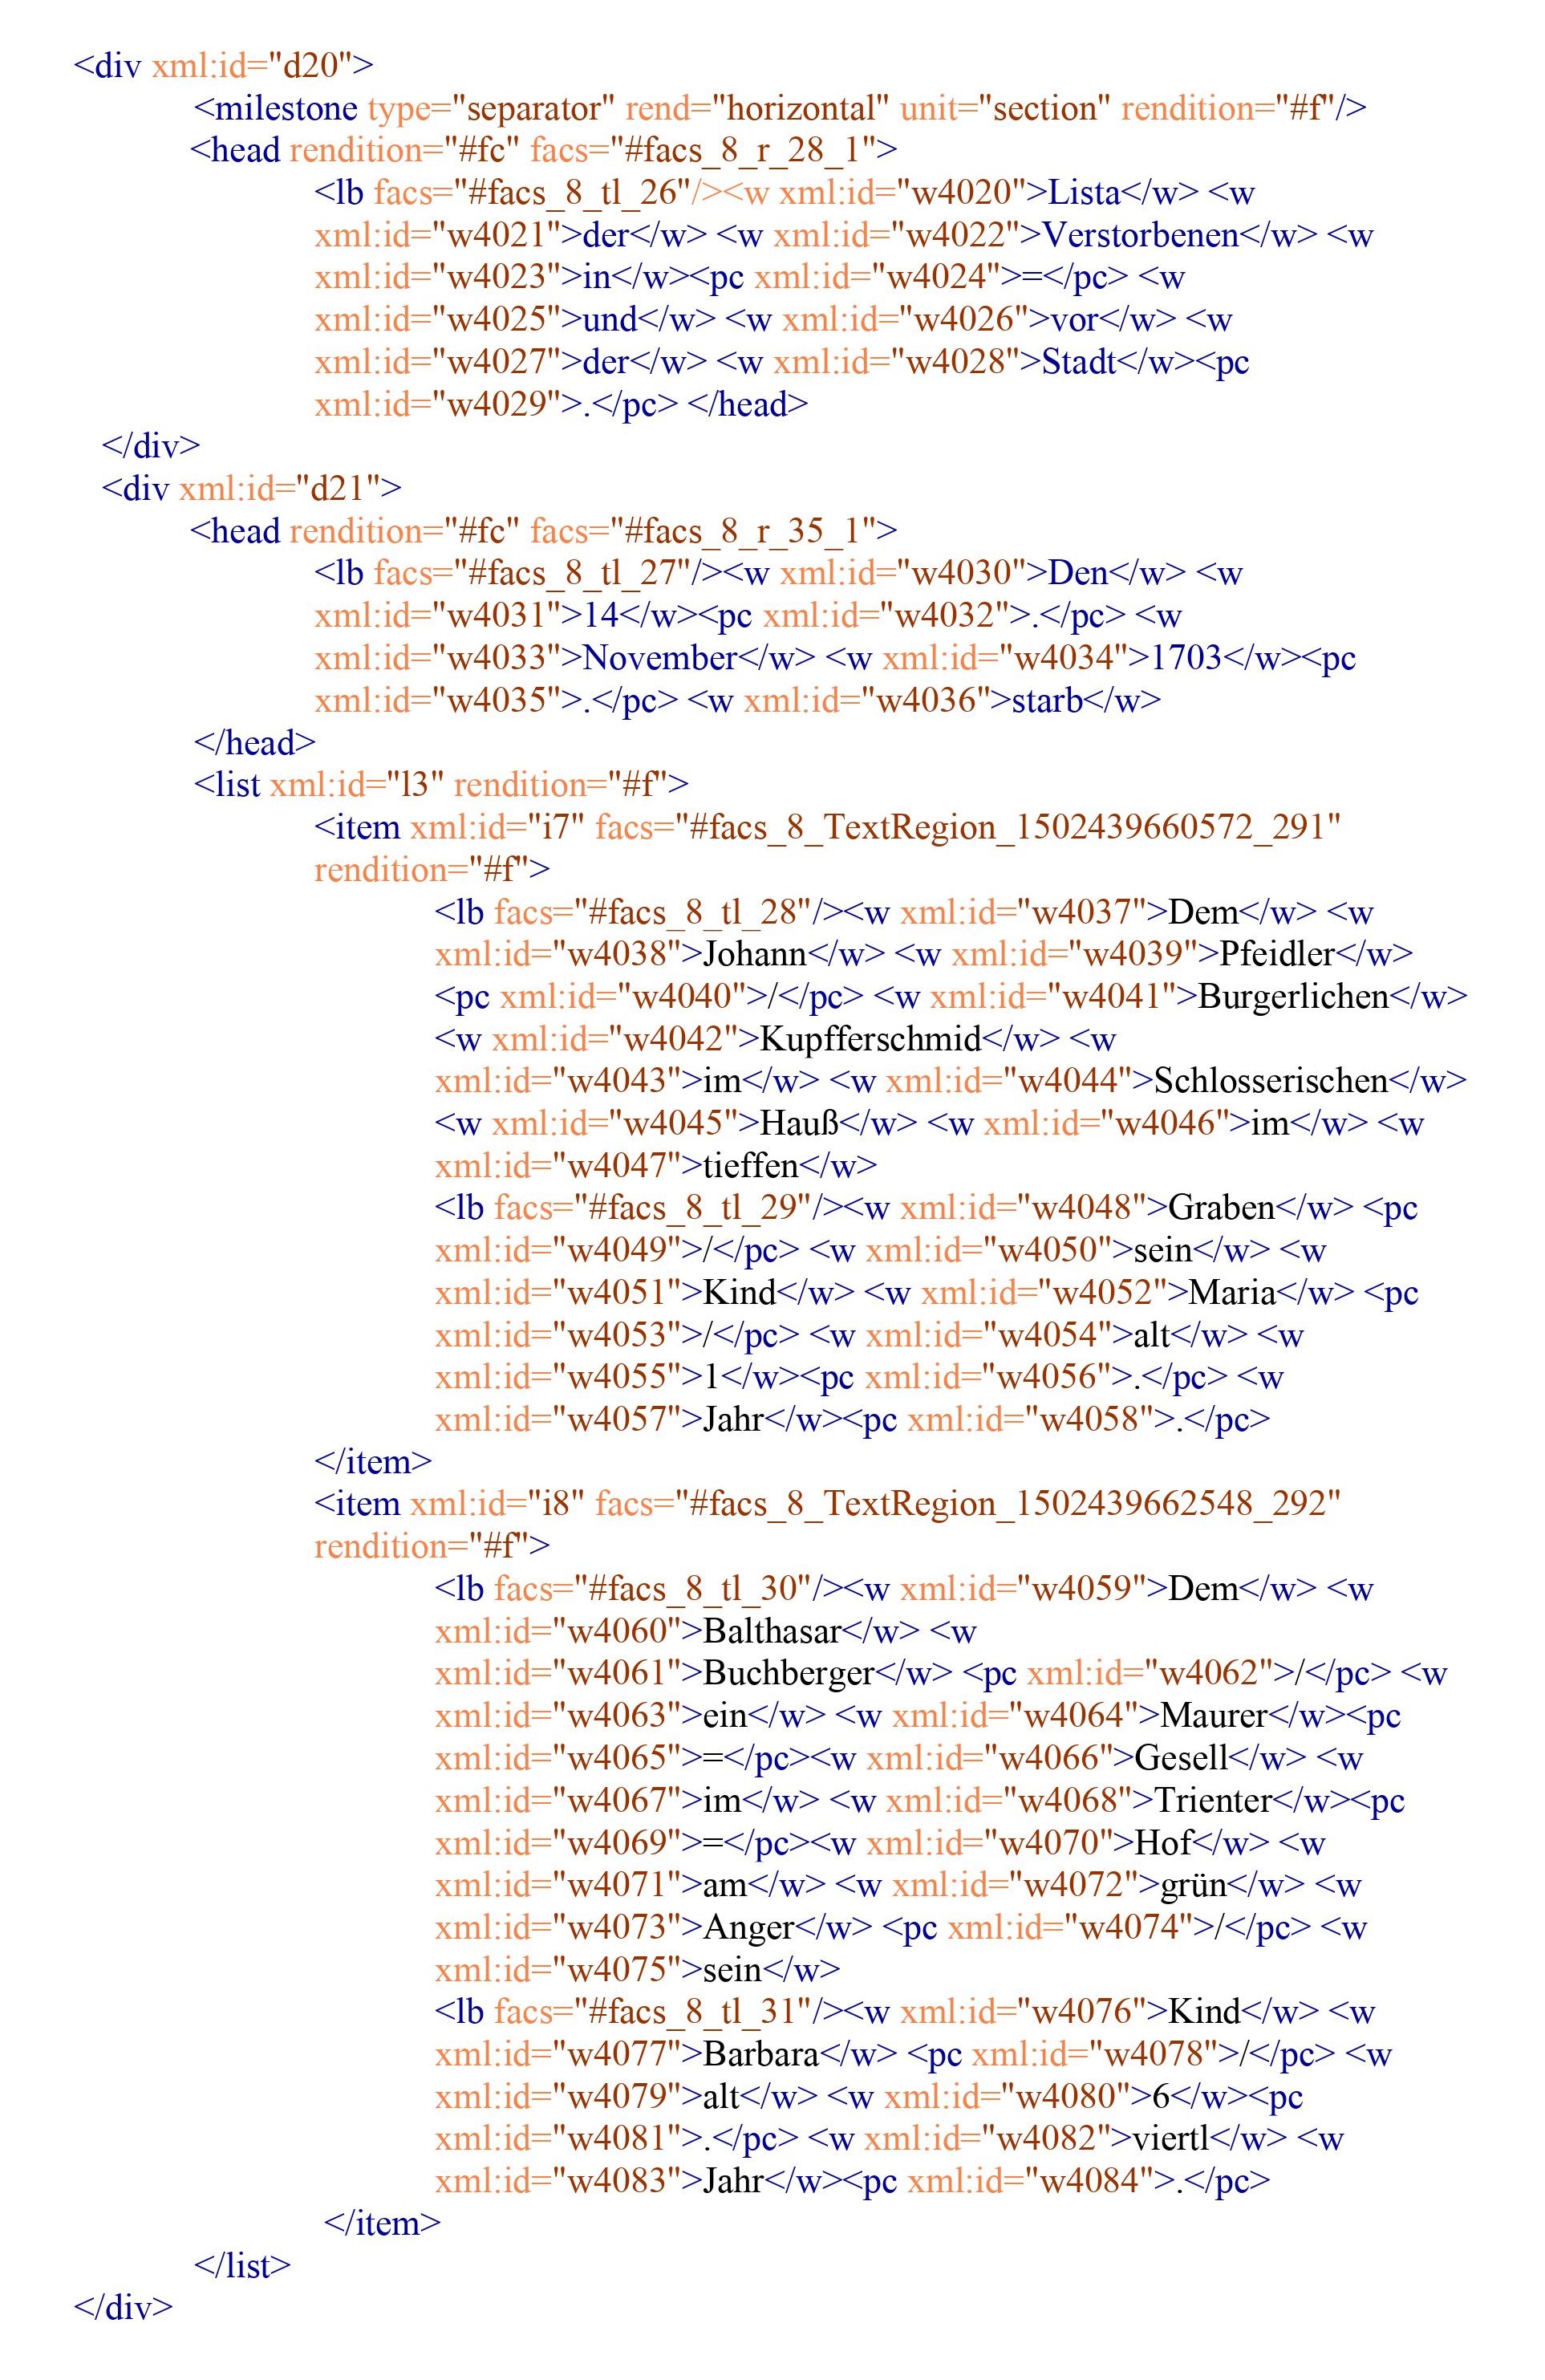 An extract from the XML/TEI file of the death list shown in Figure 1, which
                  includes, among other things, a head-element and a list-element containing two
                  item-elements